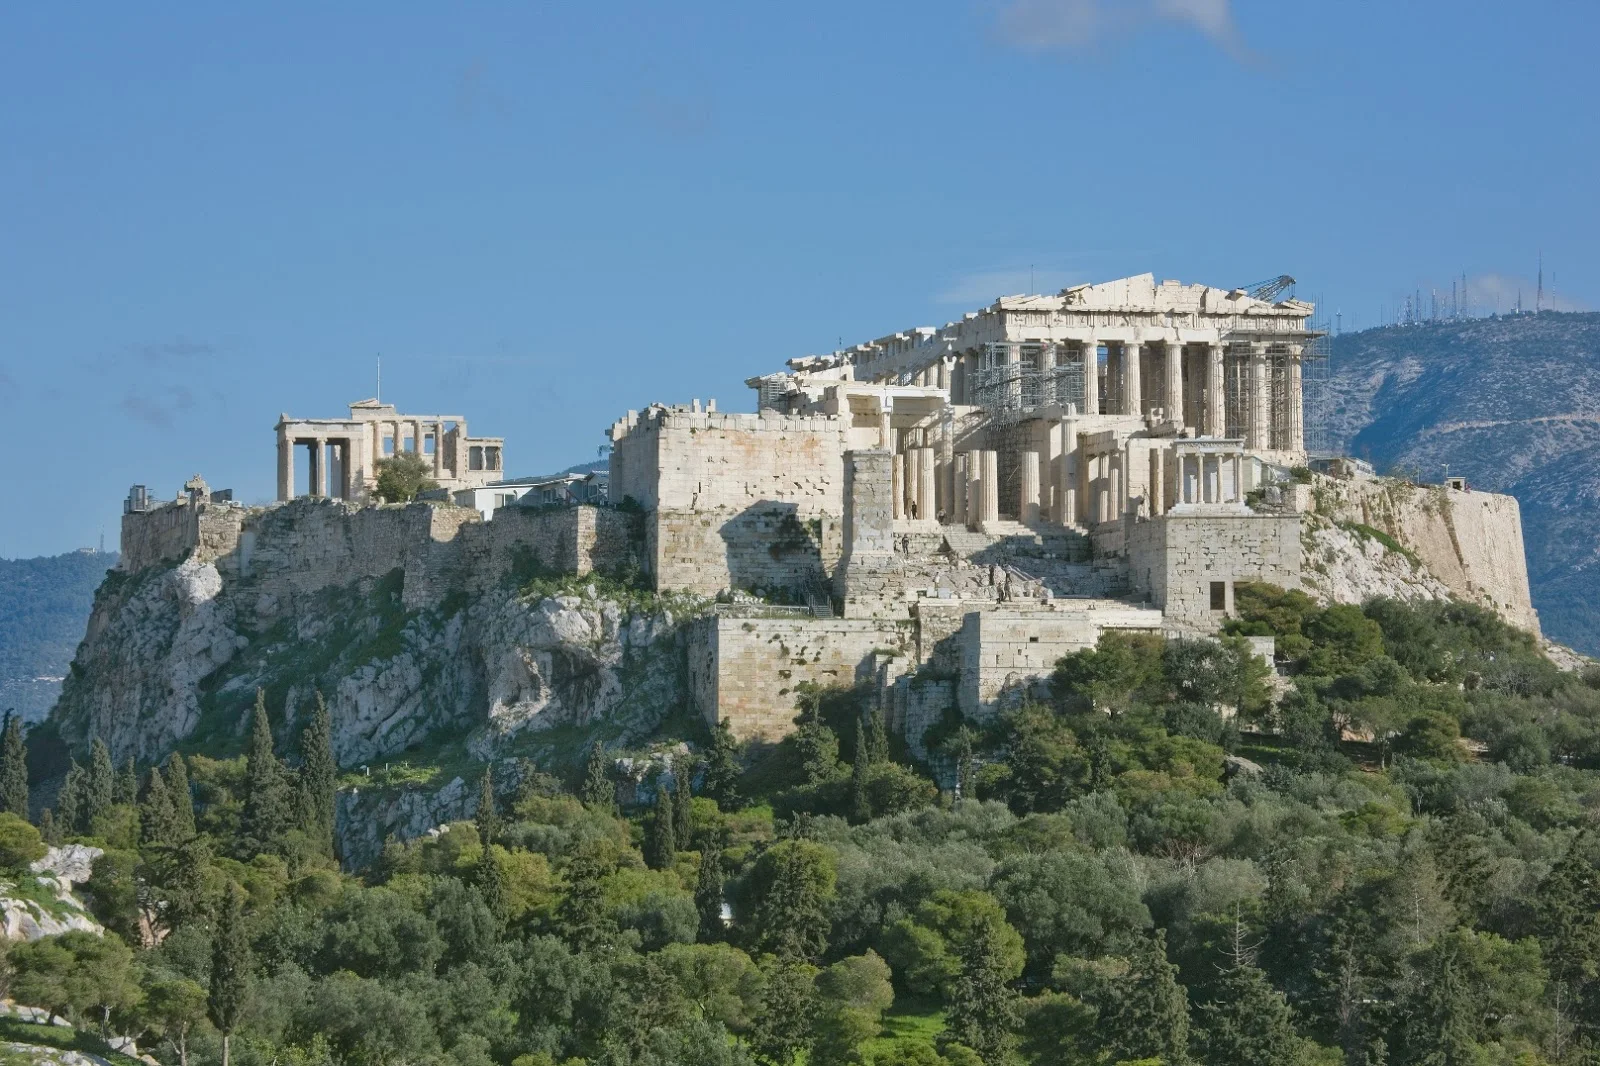 Restoration of Athenian Acropolis monuments national priority for Greece: official